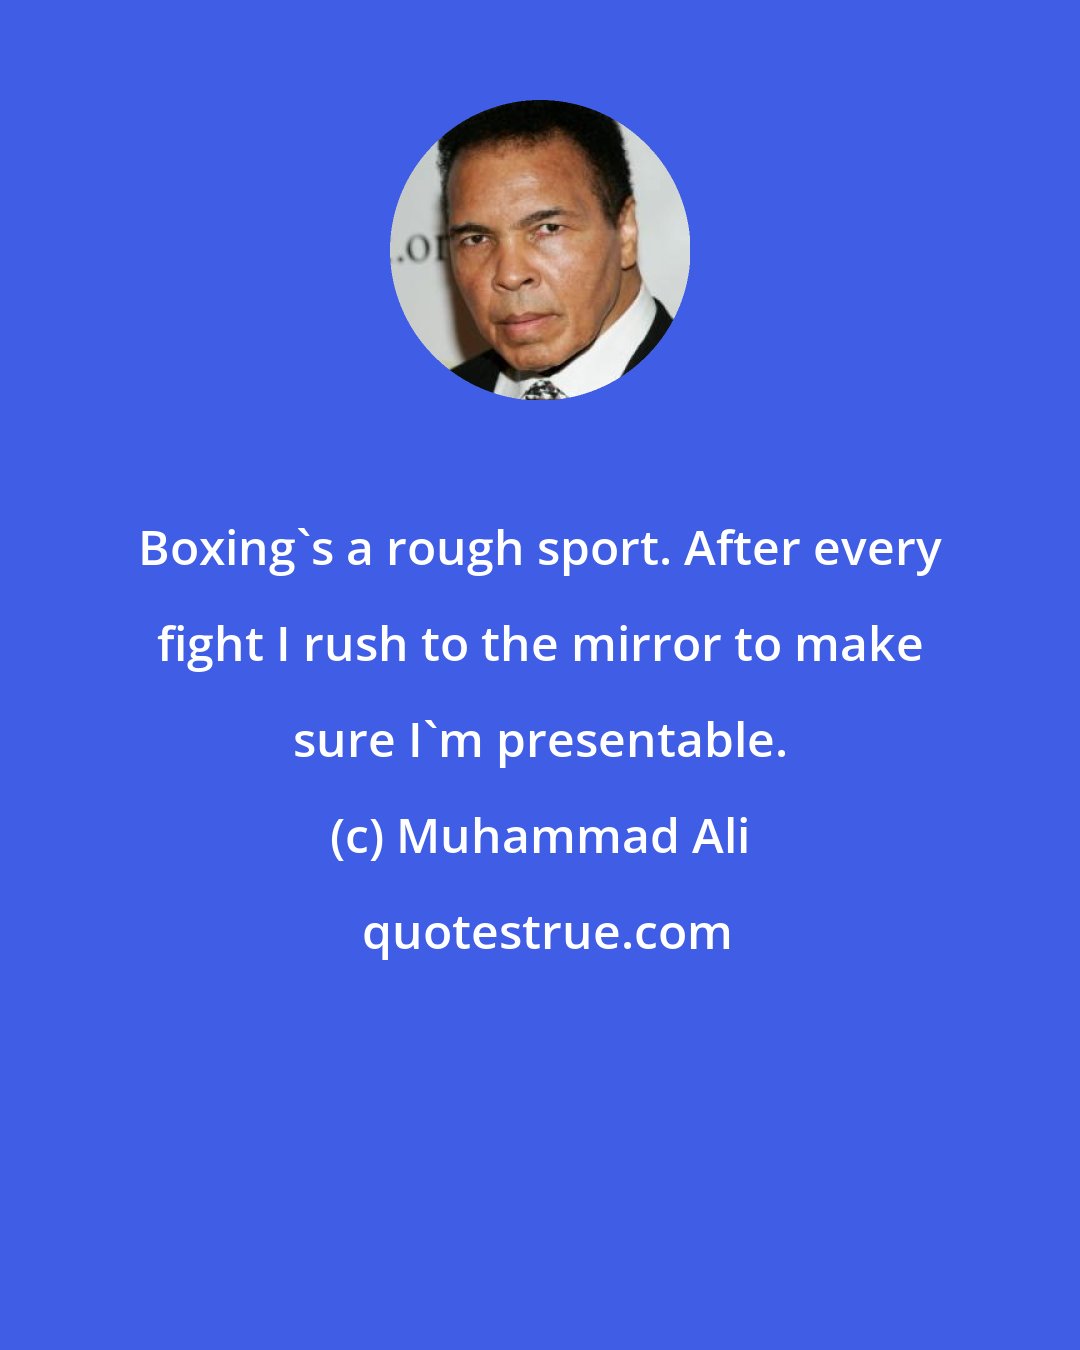 Muhammad Ali: Boxing's a rough sport. After every fight I rush to the mirror to make sure I'm presentable.